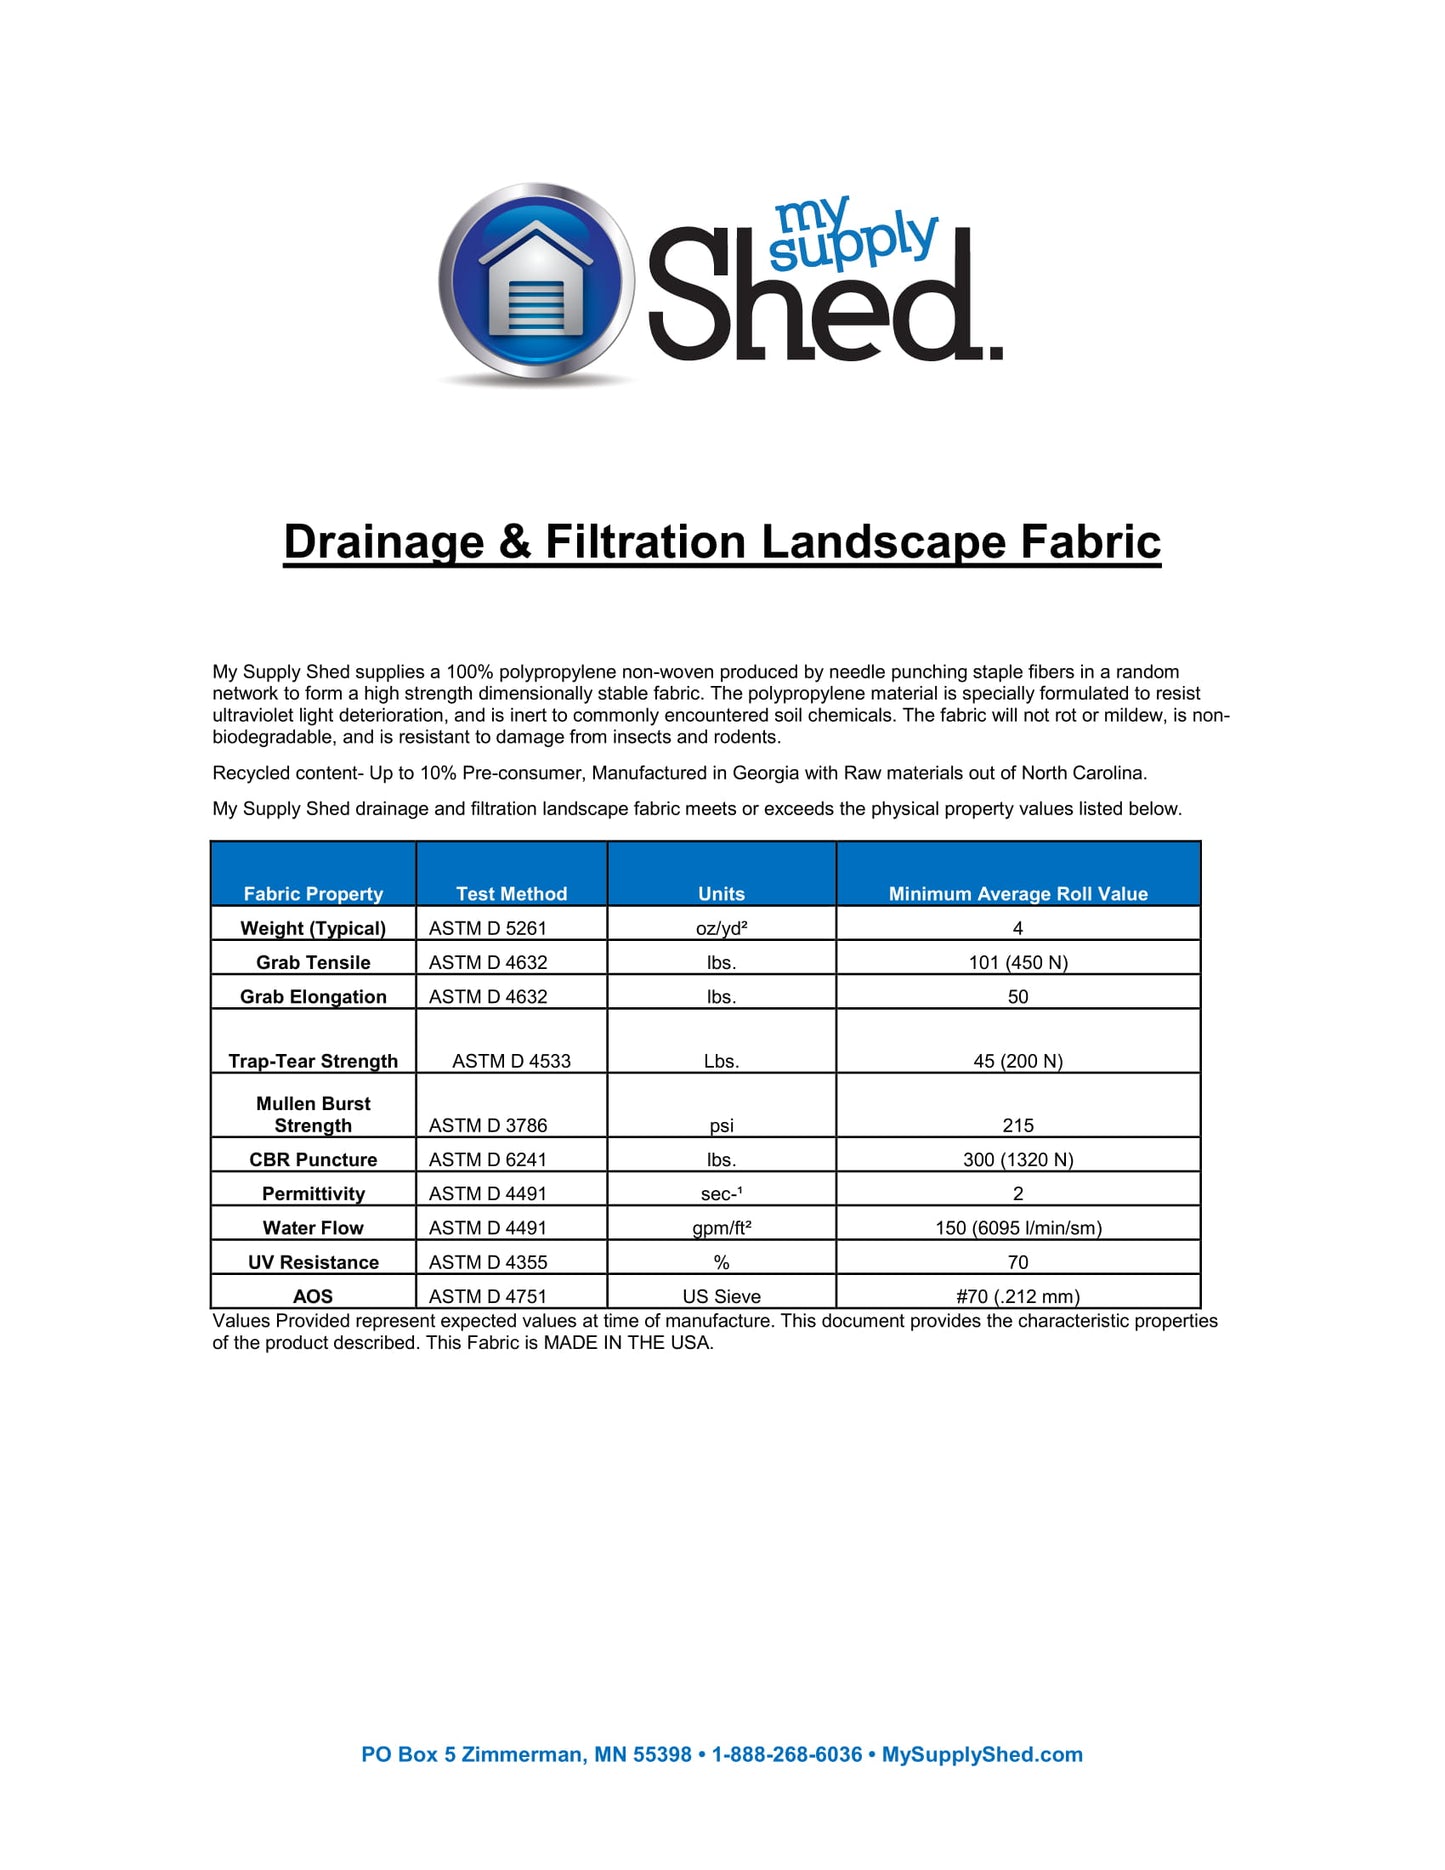 My Supply Shed Drainage & Filtration Landscape Fabric (4oz)